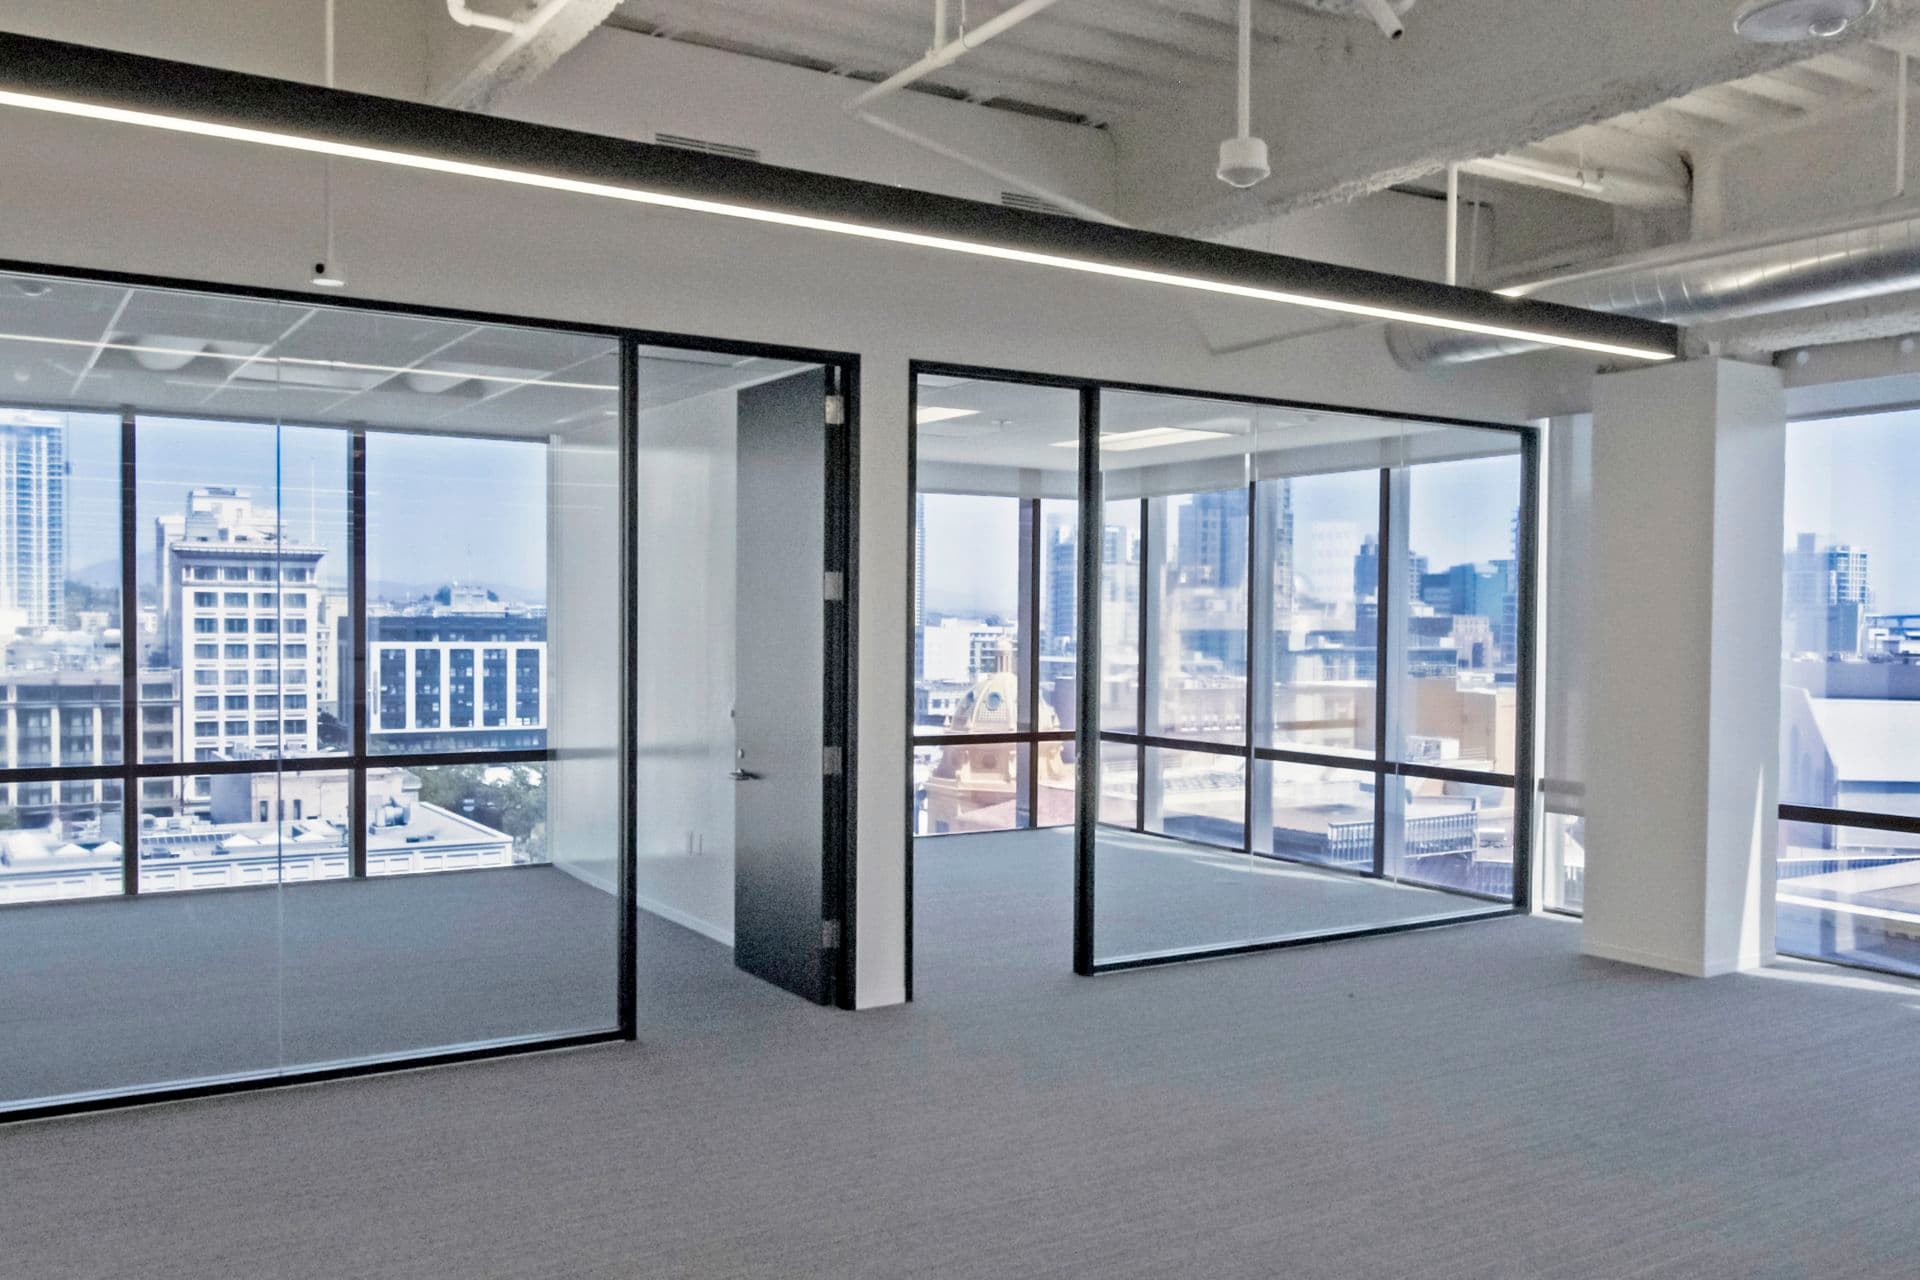 Interior view of Suite 700 at 225 Broadway, in San Diego, California.